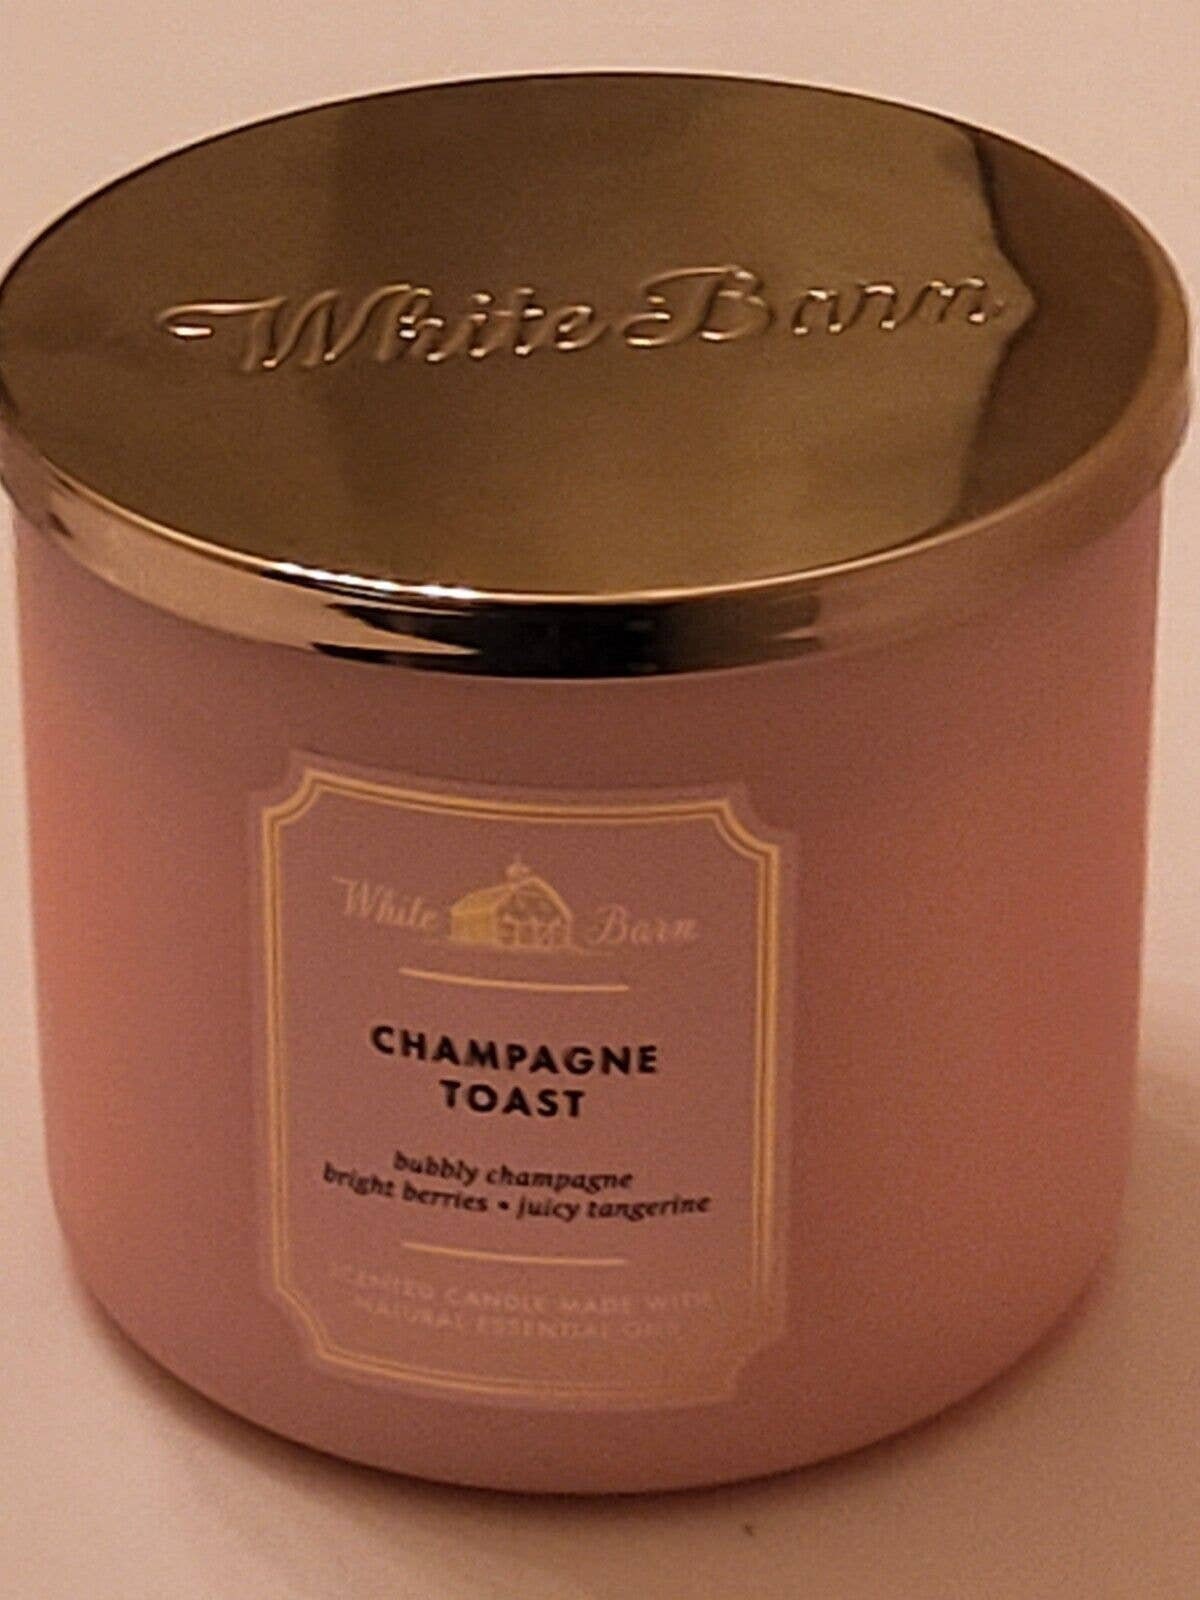  White Barn /Bath and Body Works Champagne Toast 3 Wick Candle :  Home & Kitchen